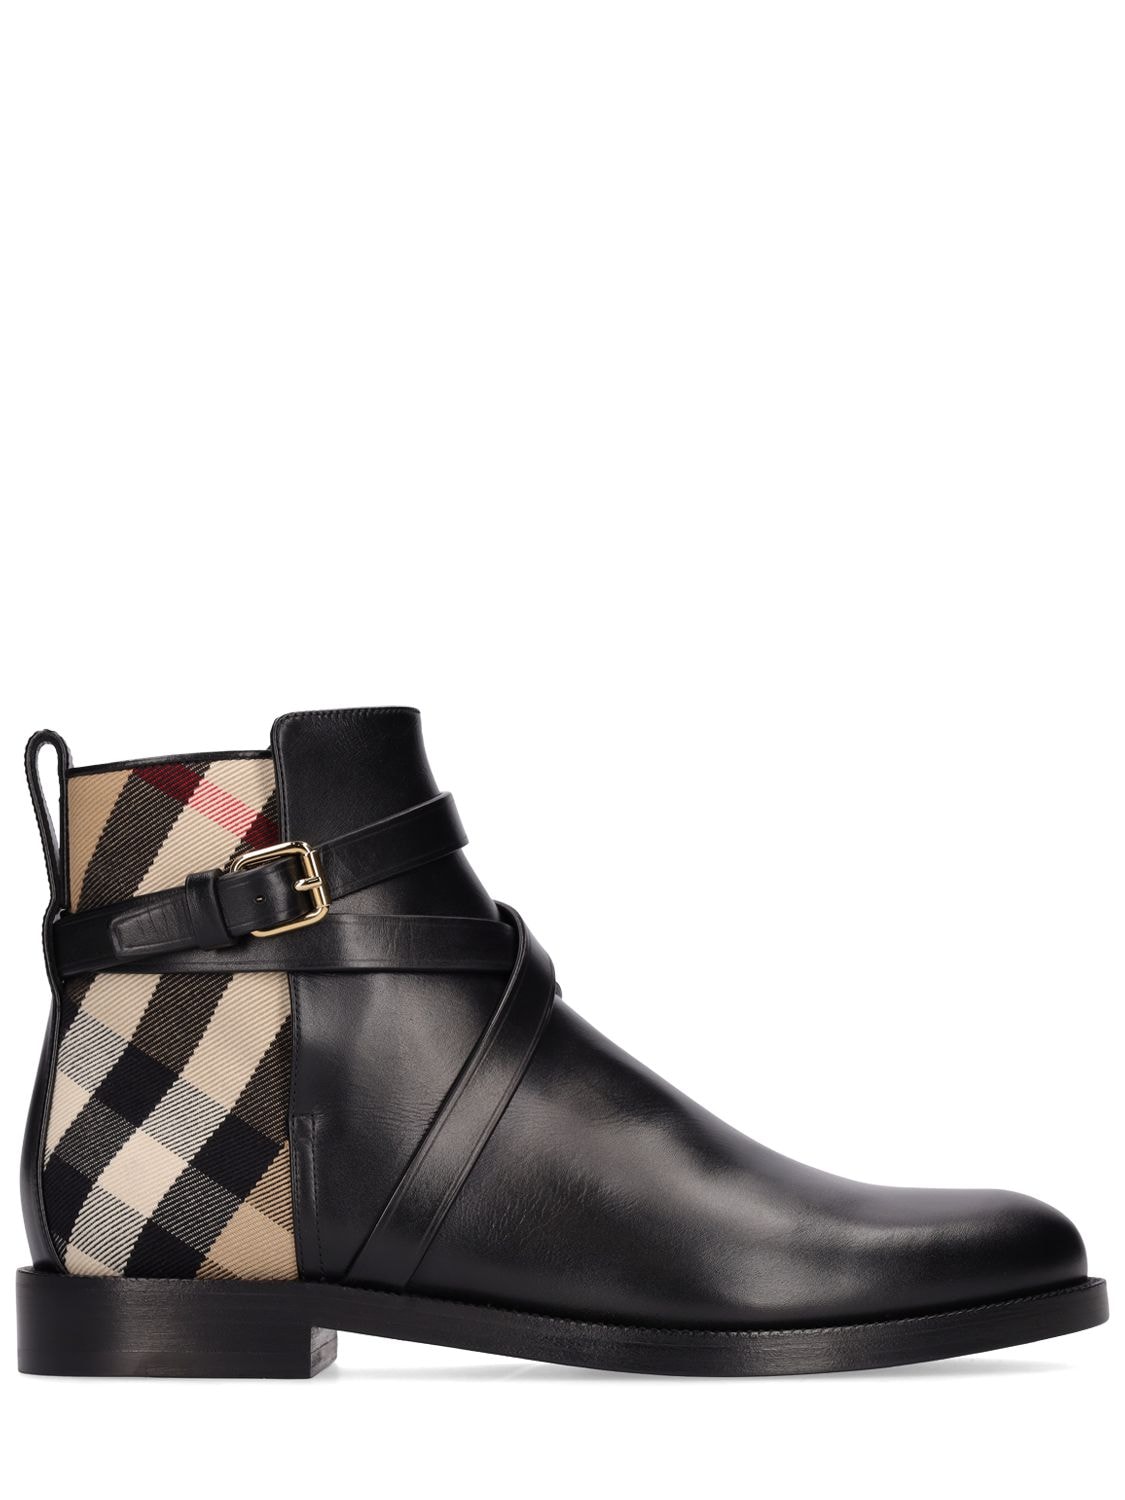 Mm New Pryle Leather & Check Boots - BURBERRY - Modalova